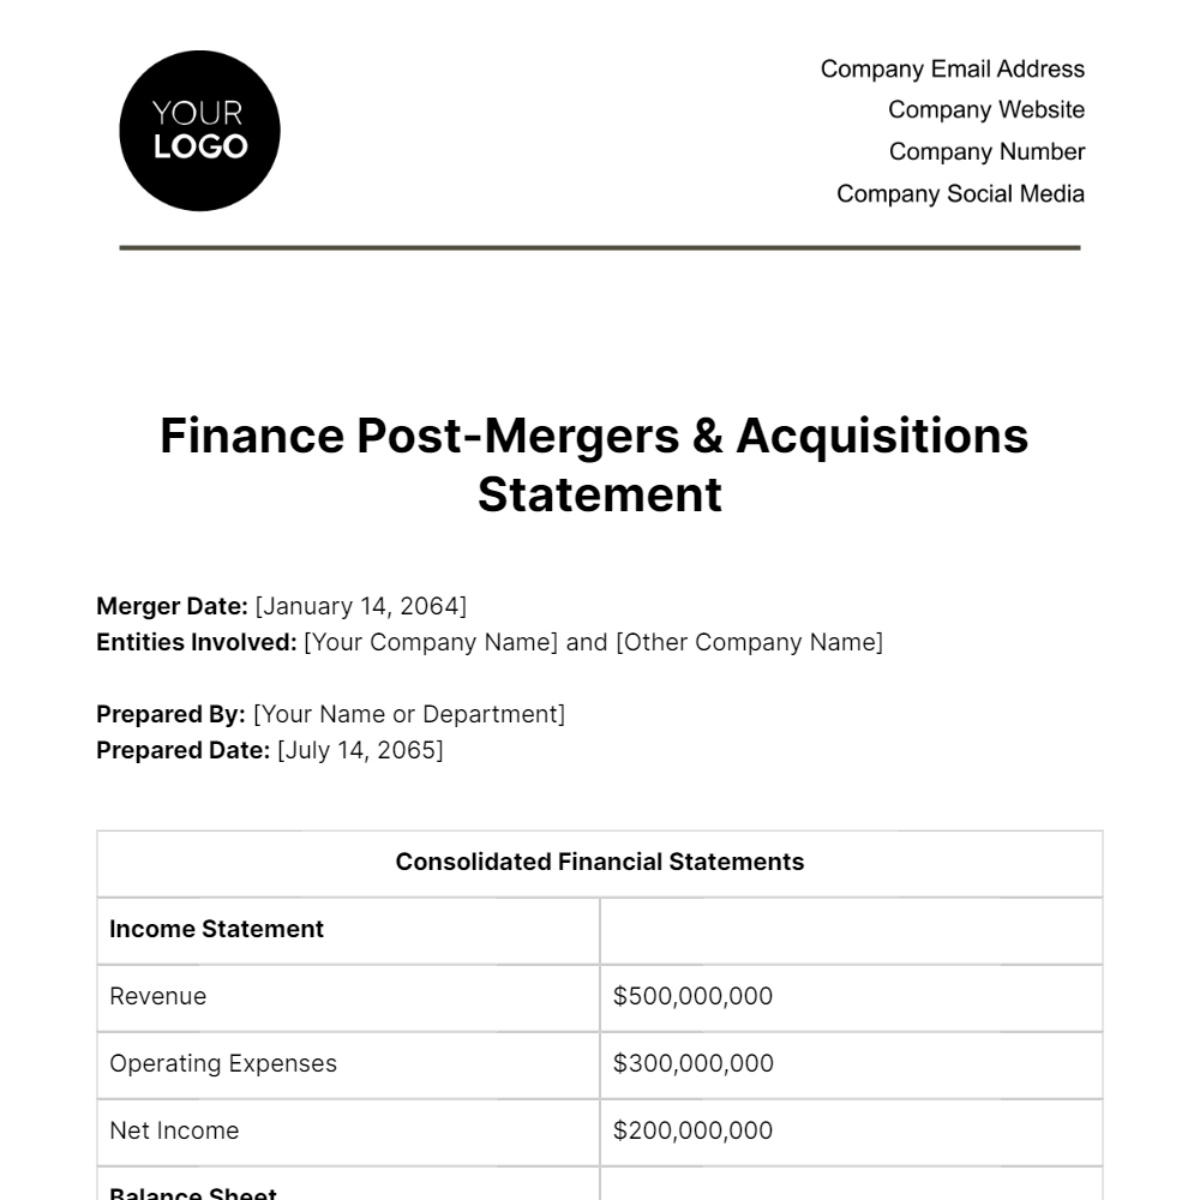 Finance Post-Mergers & Acquisitions Statement Template